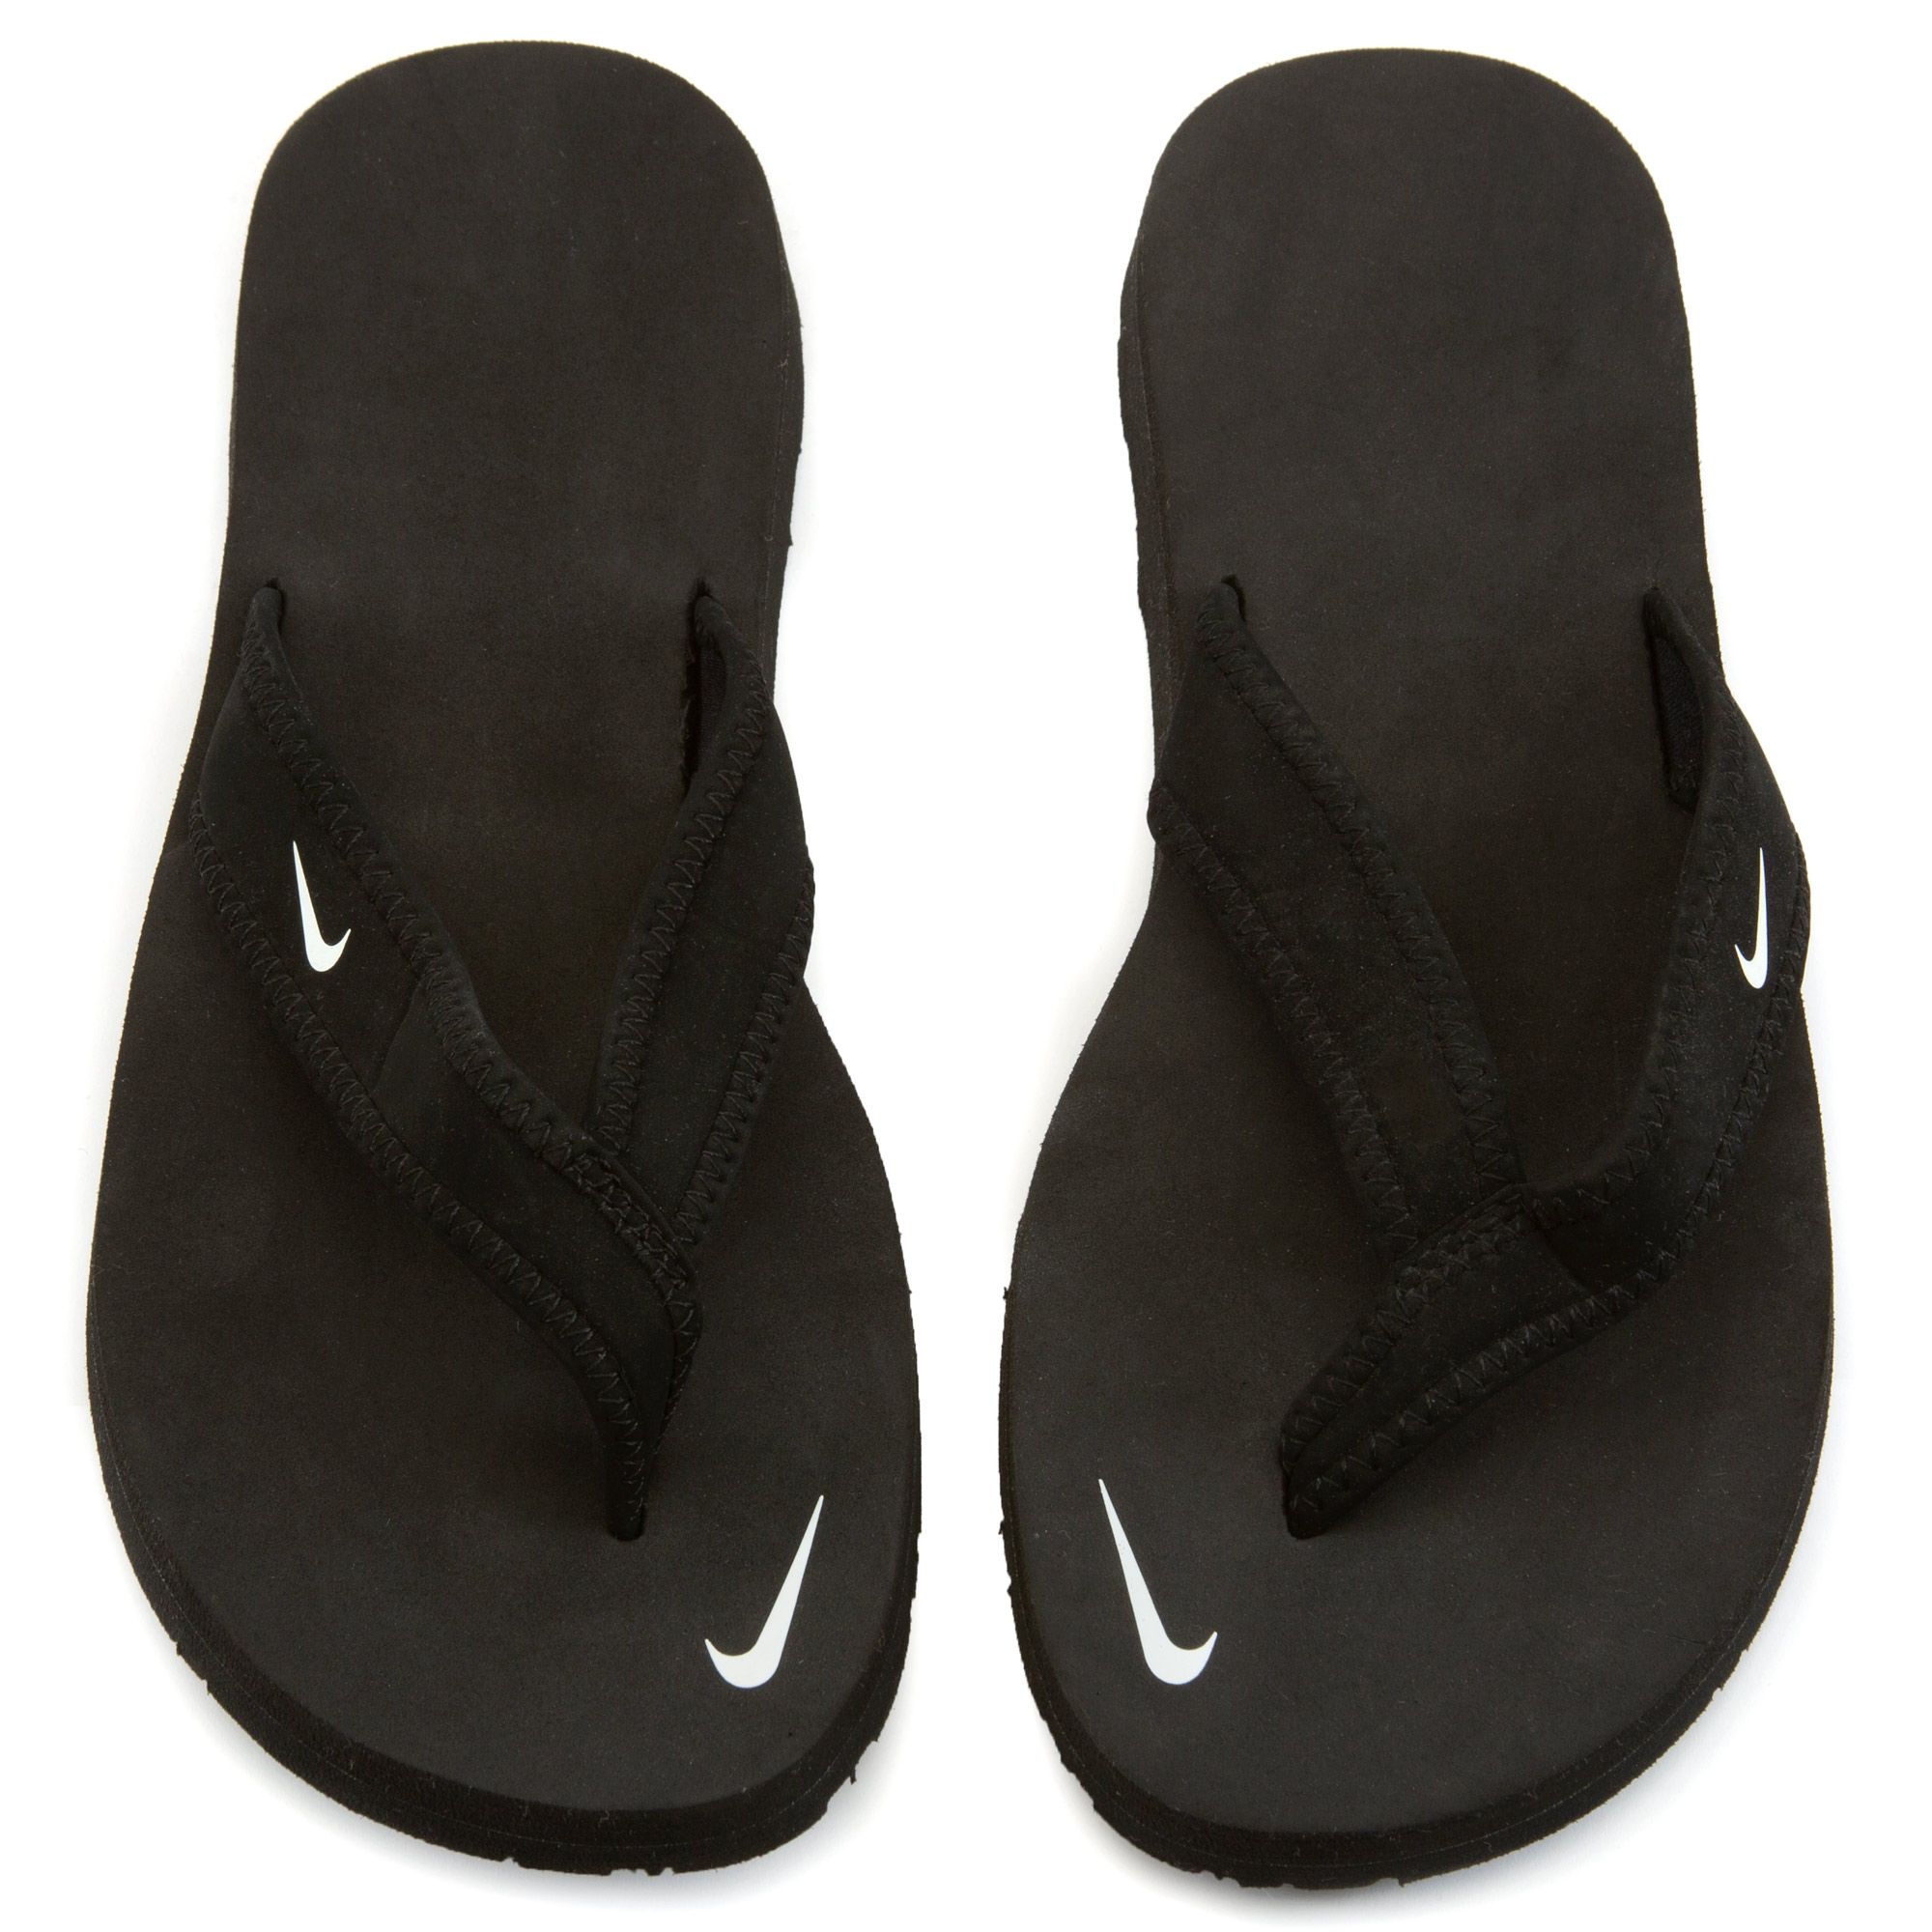 Nike Womens Celso Girl Thong/Sandal/Flip flop style#314870 011